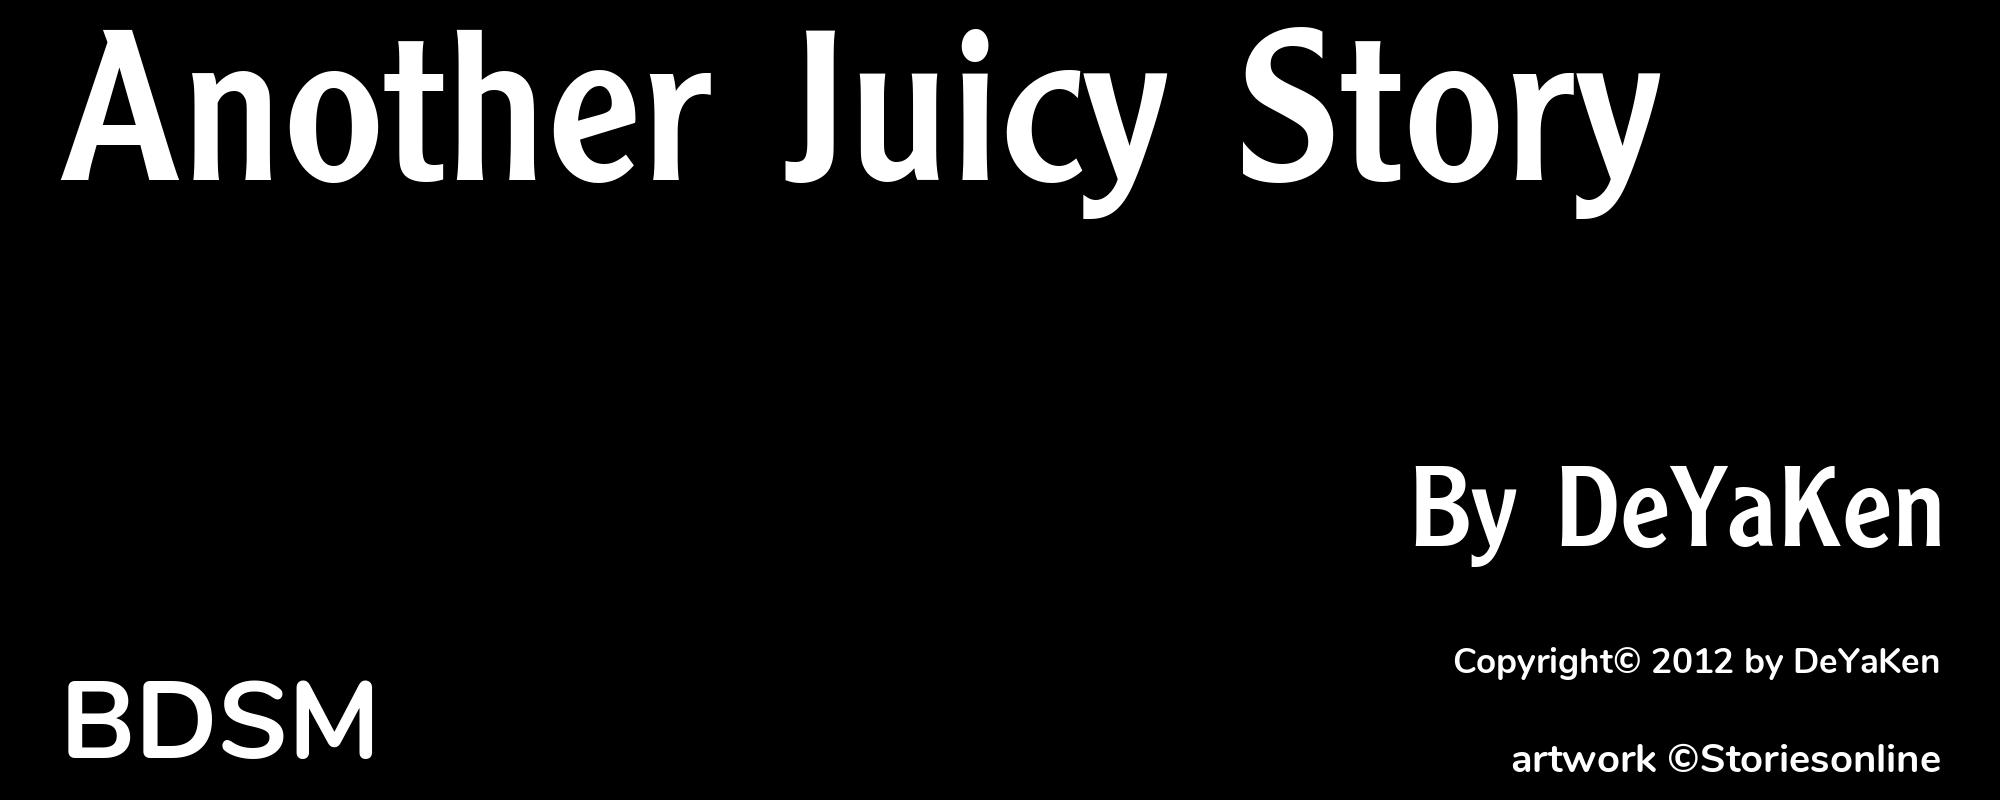 Another Juicy Story - Cover